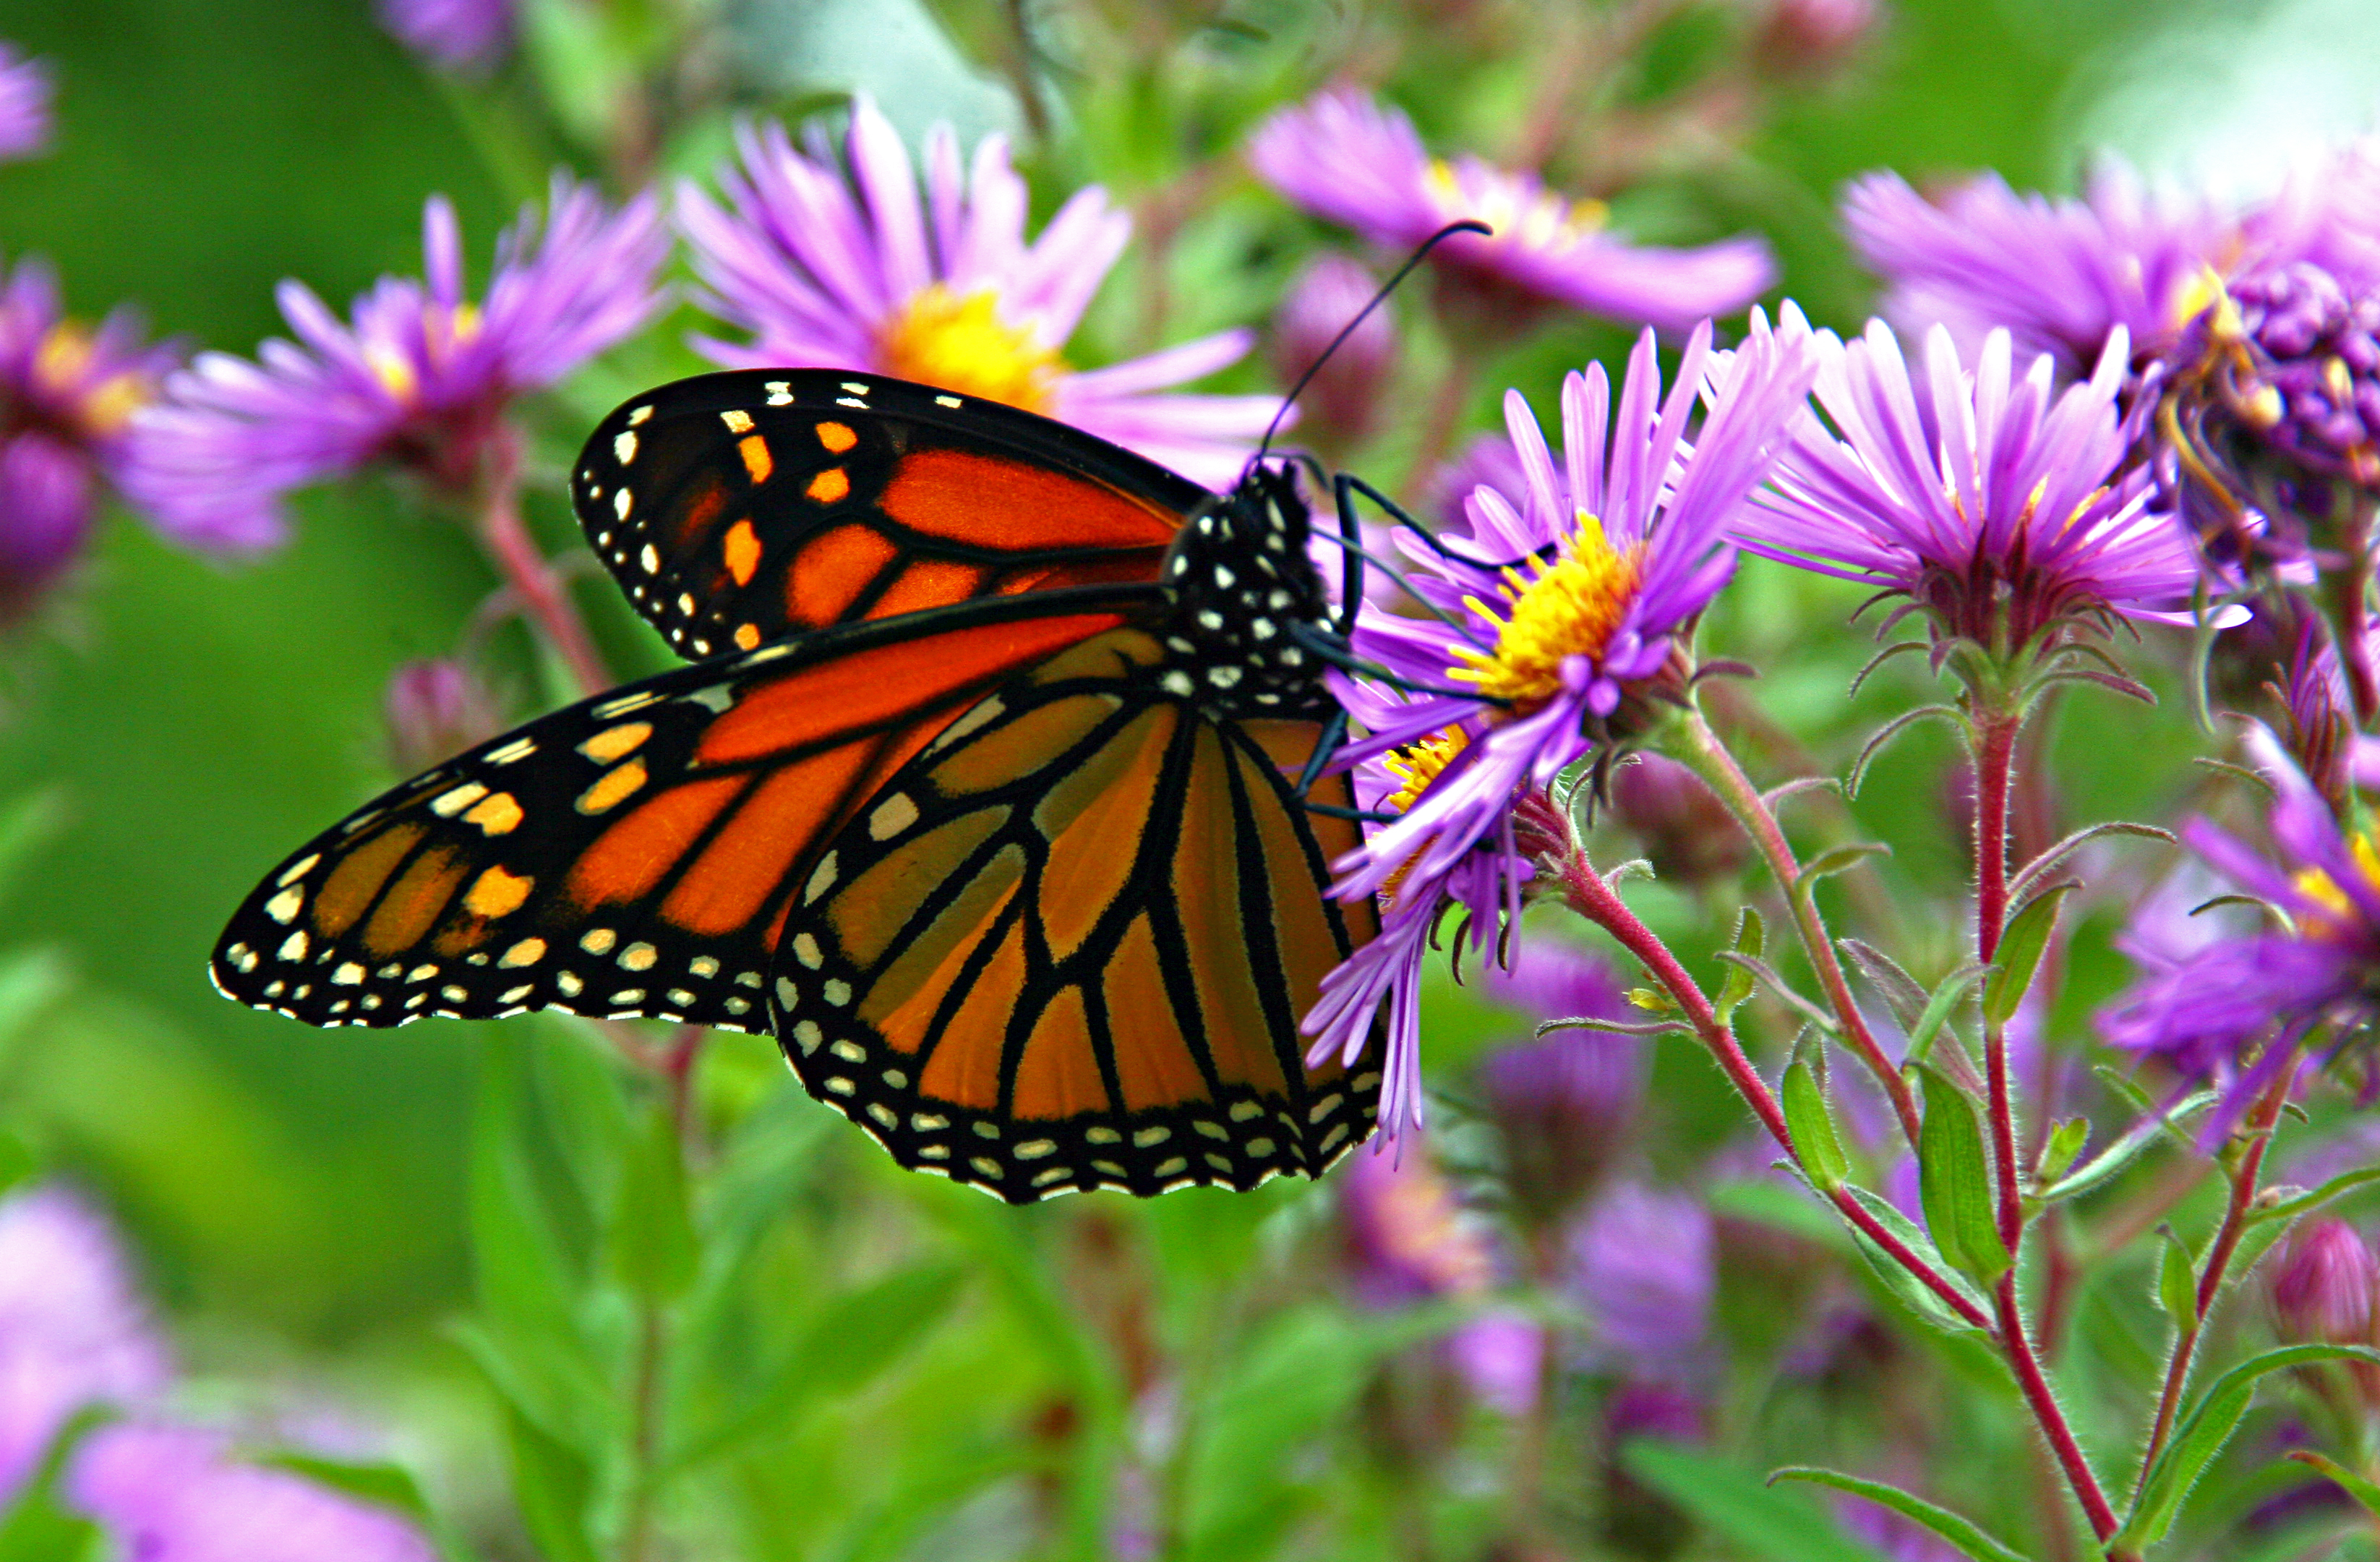 In the foreground, an orange, black and white monarch sits atop a yellow and purple flower, more of which can be seen in the background.